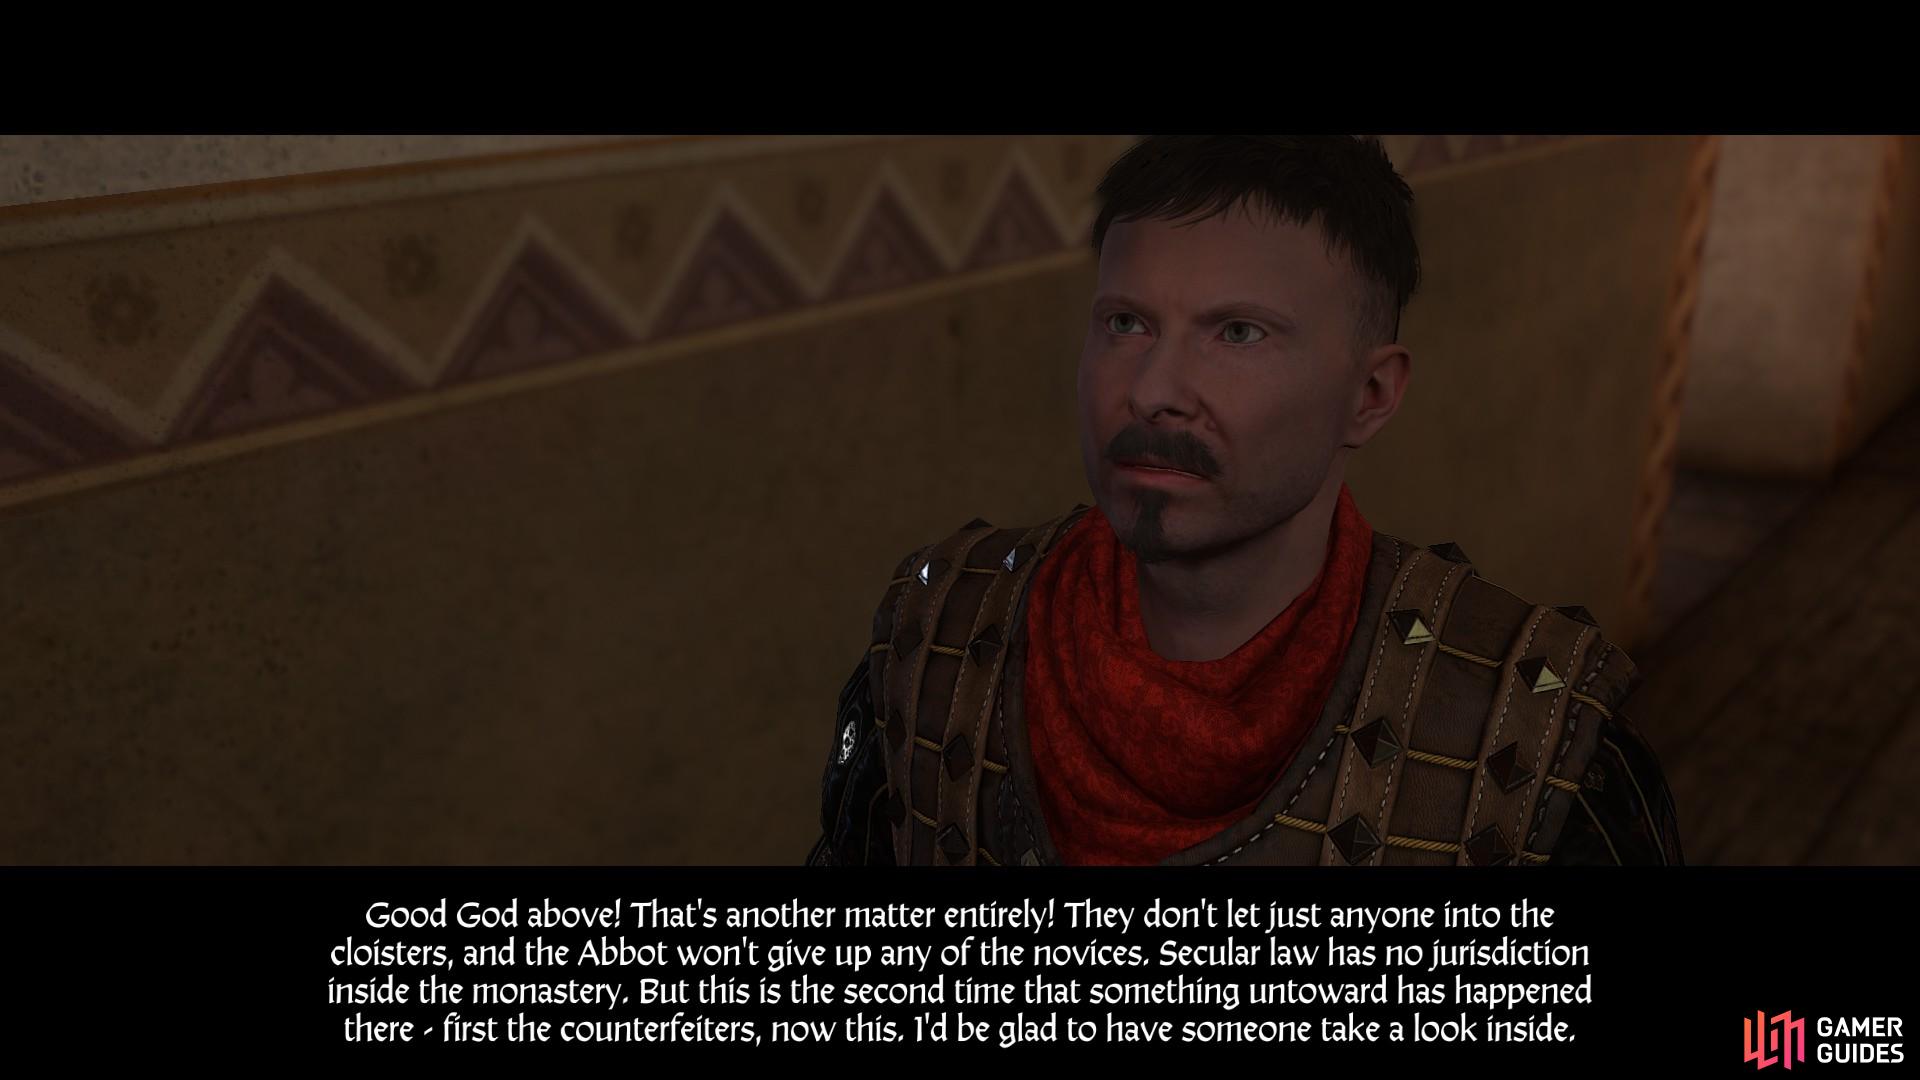 Sir Radzig is eager to have Henry have a look inside the monastery, but he makes it clear that Pious should be brought back to Rattay rather than killed. 